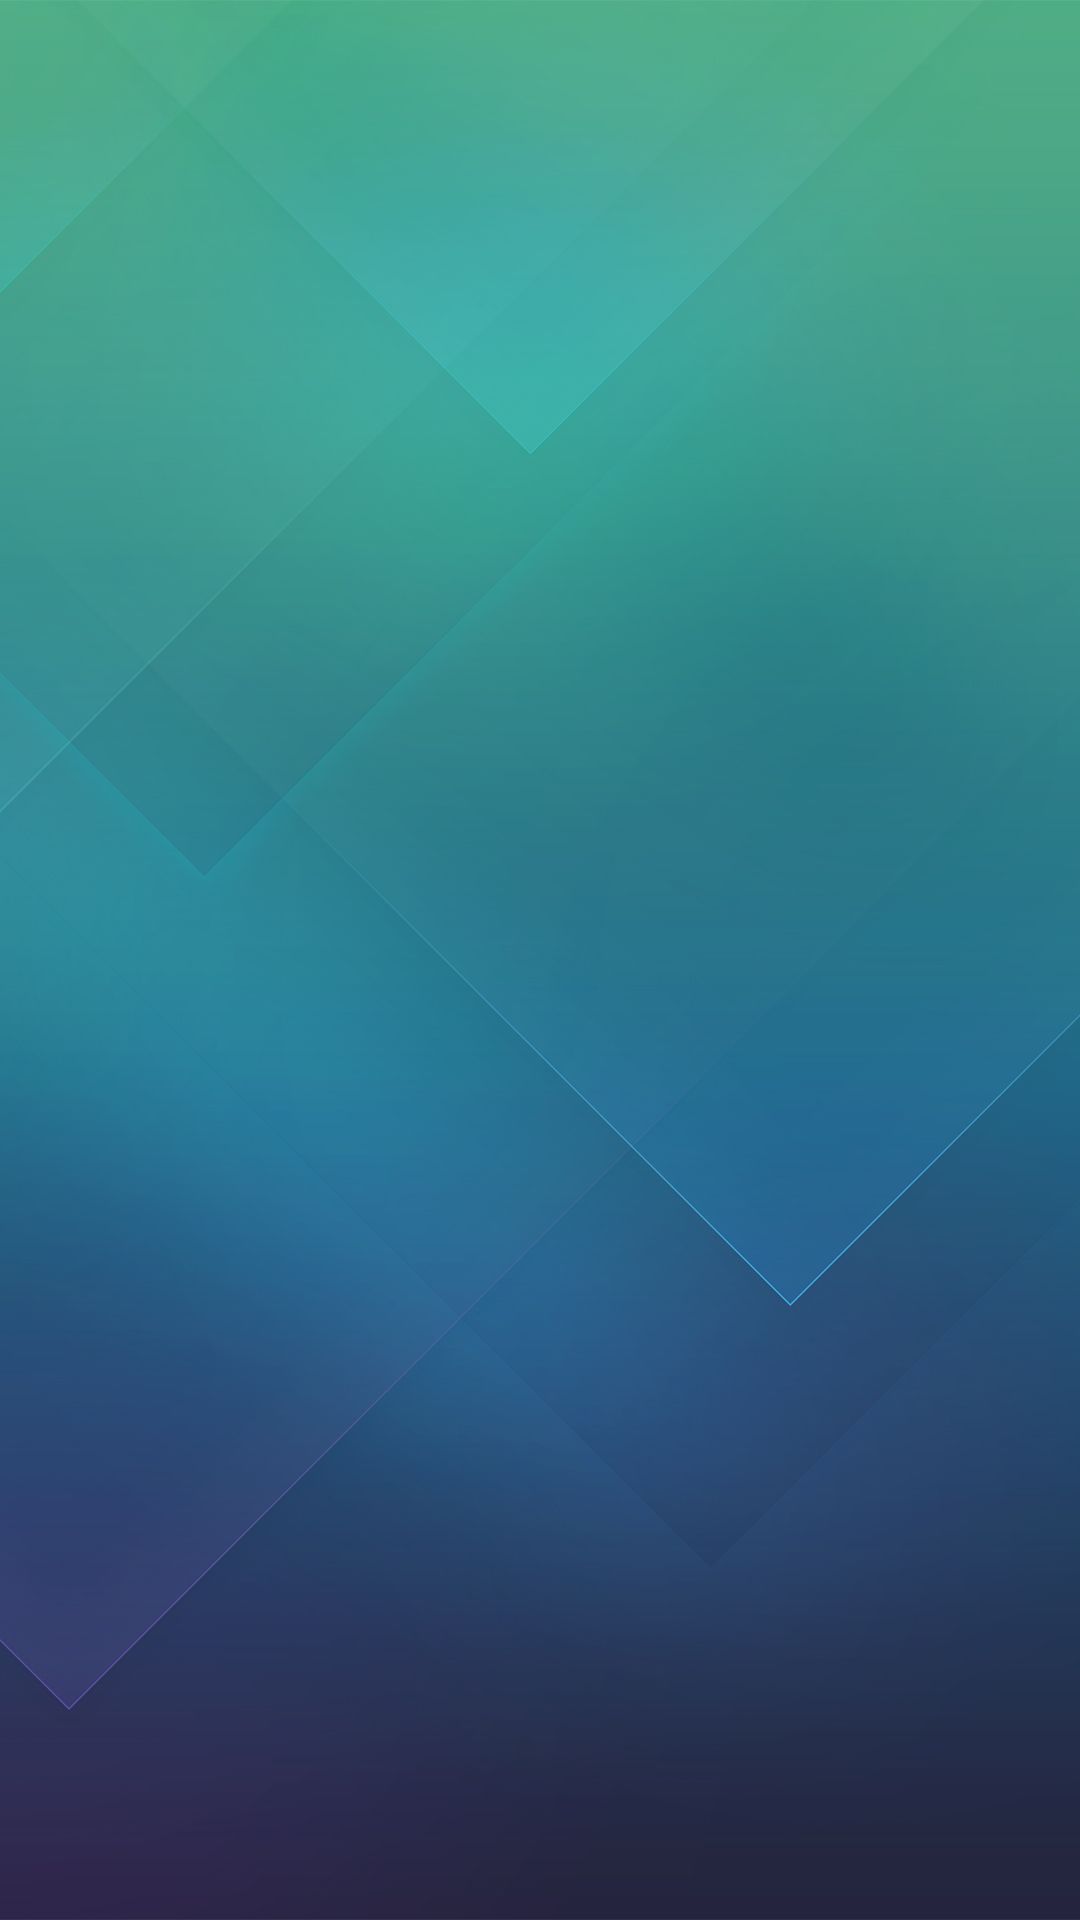 NEW] MEIZU V8 Stock wallpapers !! Download now !-Flyme Official Forum